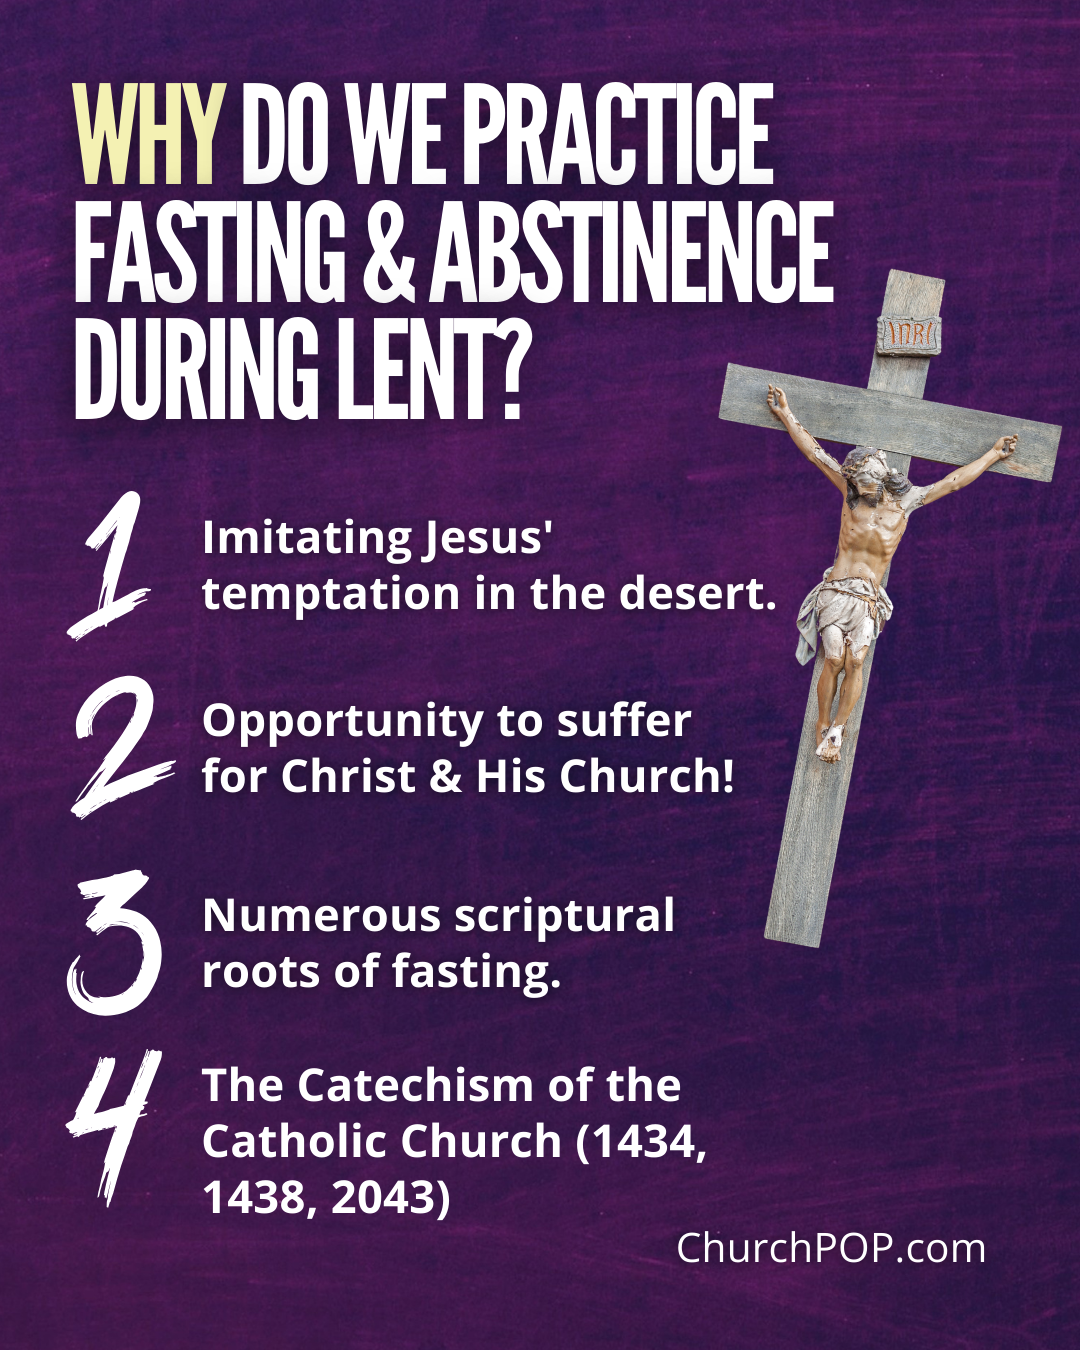 fasting biblical, fasting and prayer, fasting scriptures, fasting verses in the bible